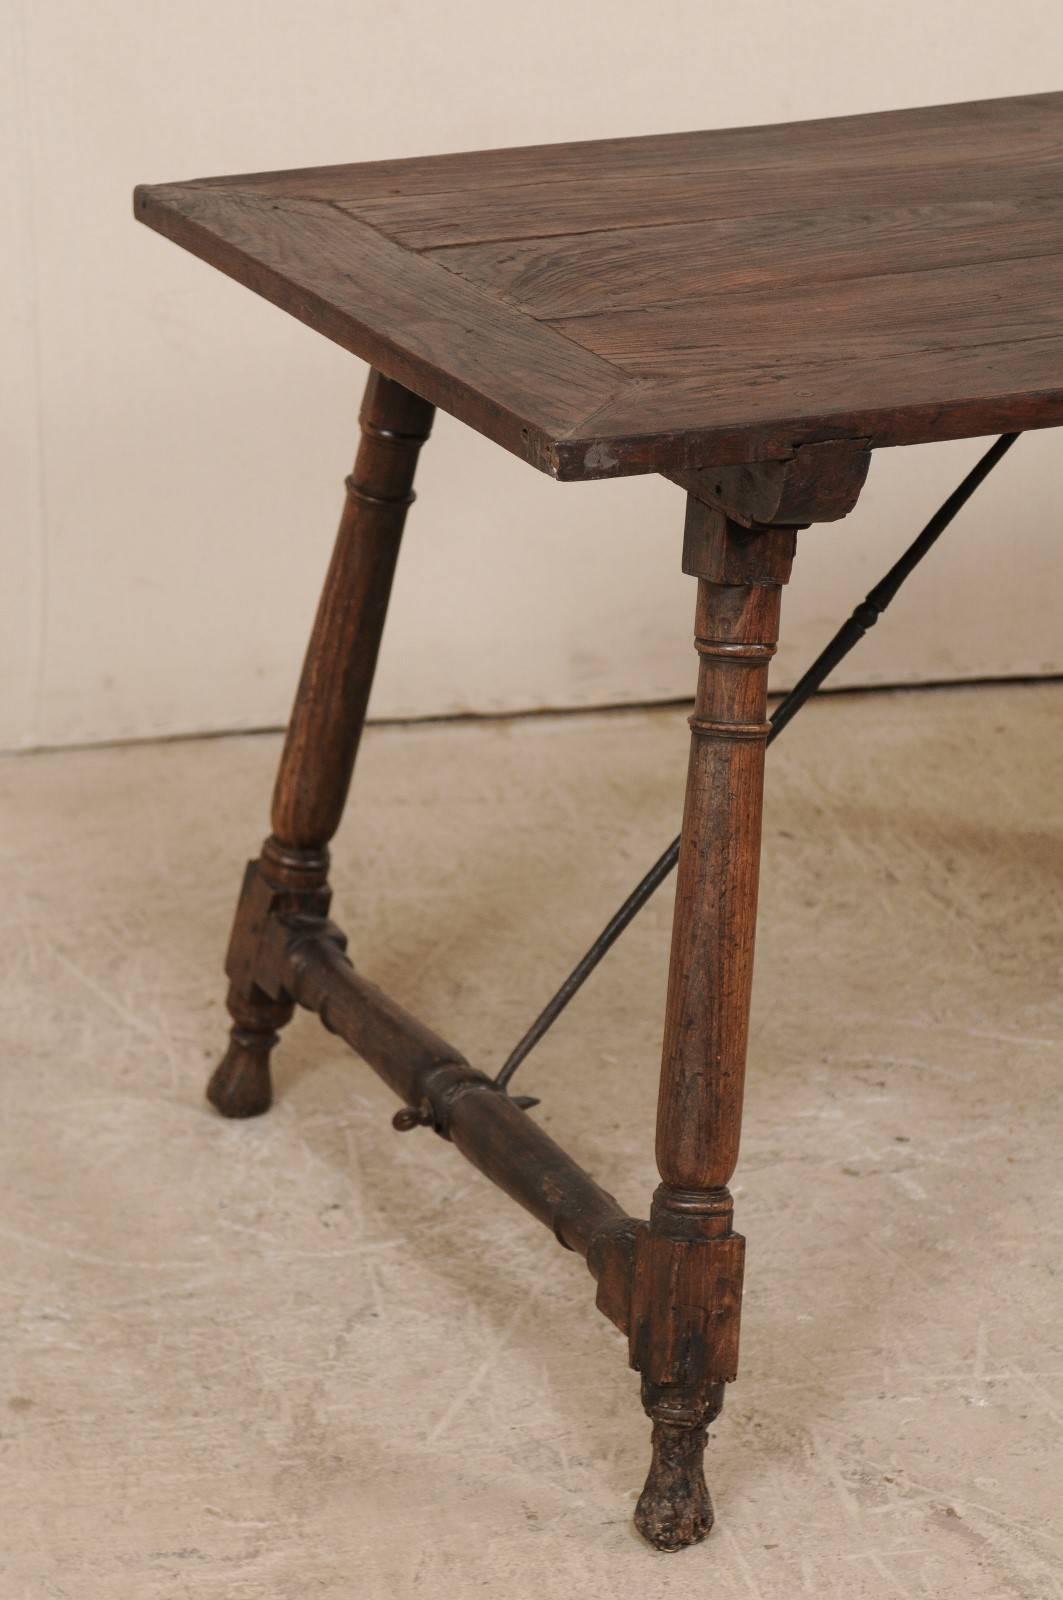 Carved Antique Italian Wood & Iron Stretchered Table (or Great Desk!) Late 18th Century